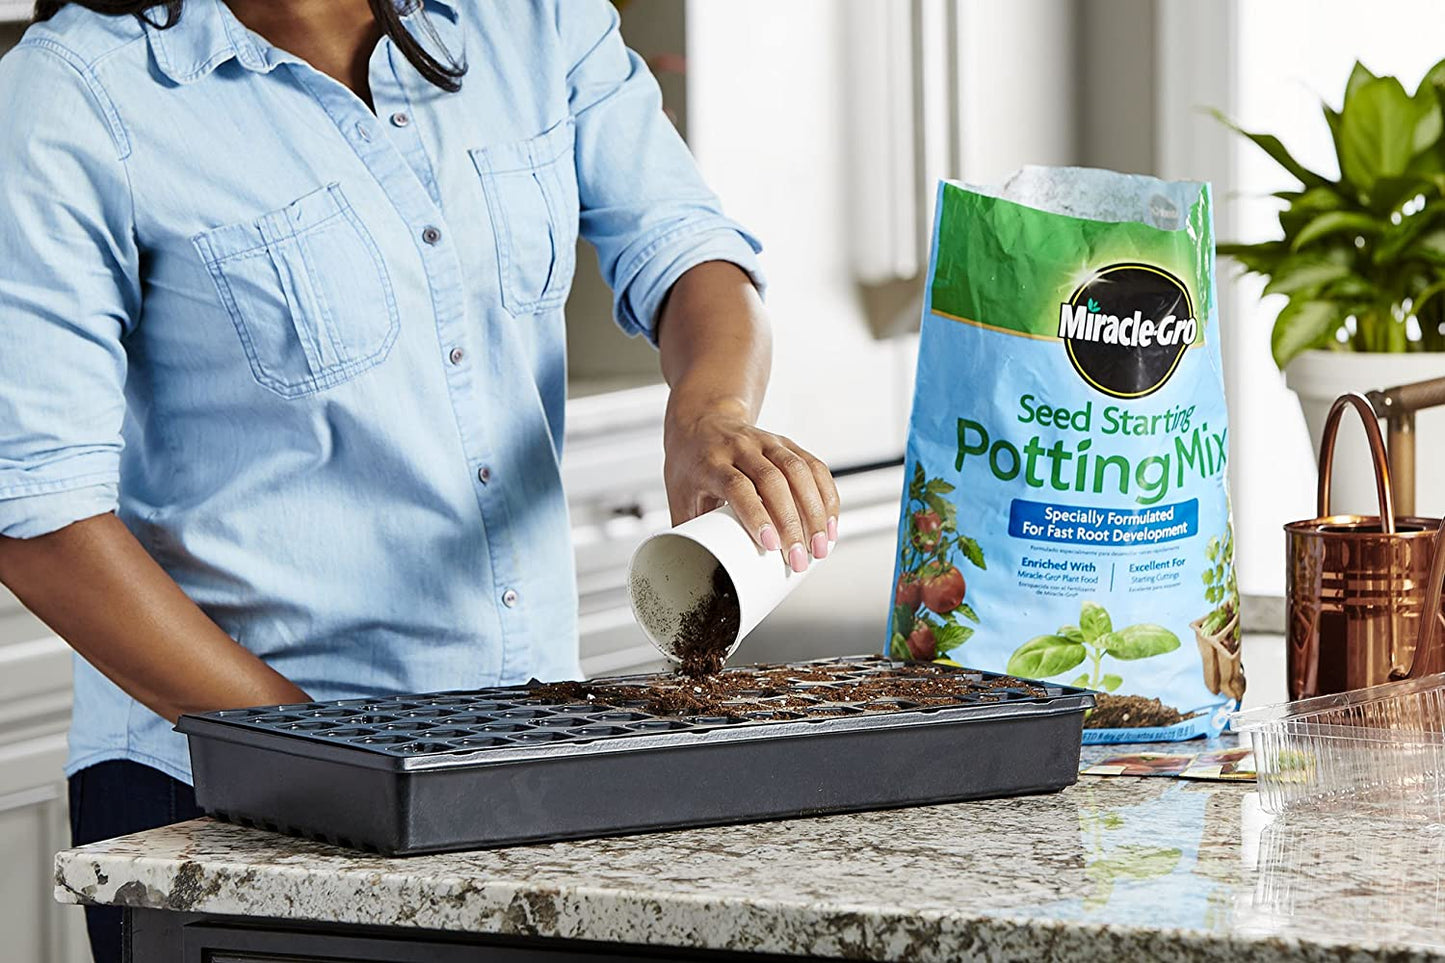 Miracle-Gro Seed Starting Potting Mix, 8 Qt.